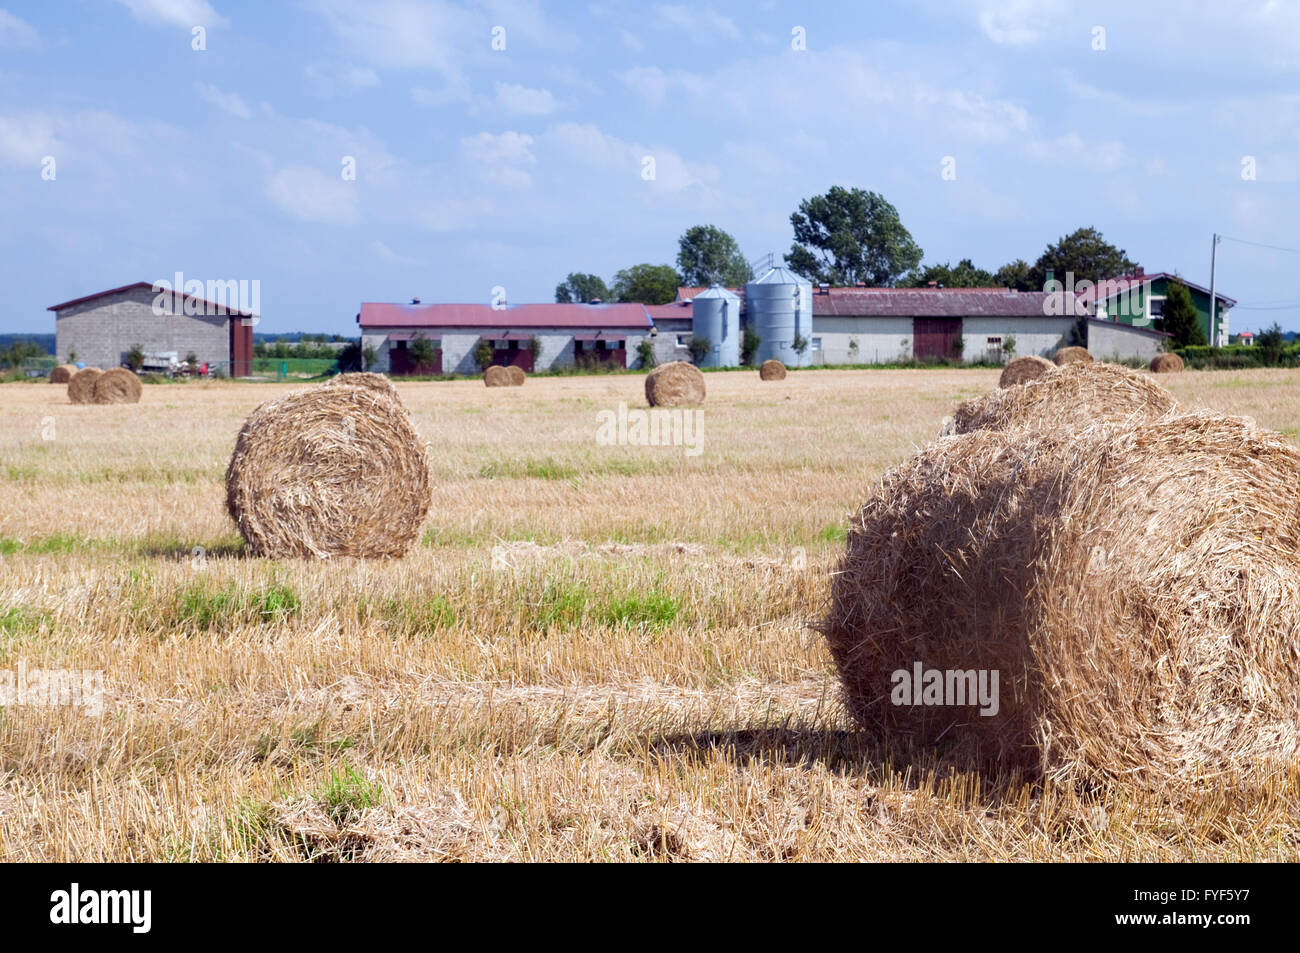 Farm buildings and haystack on the field Stock Photo